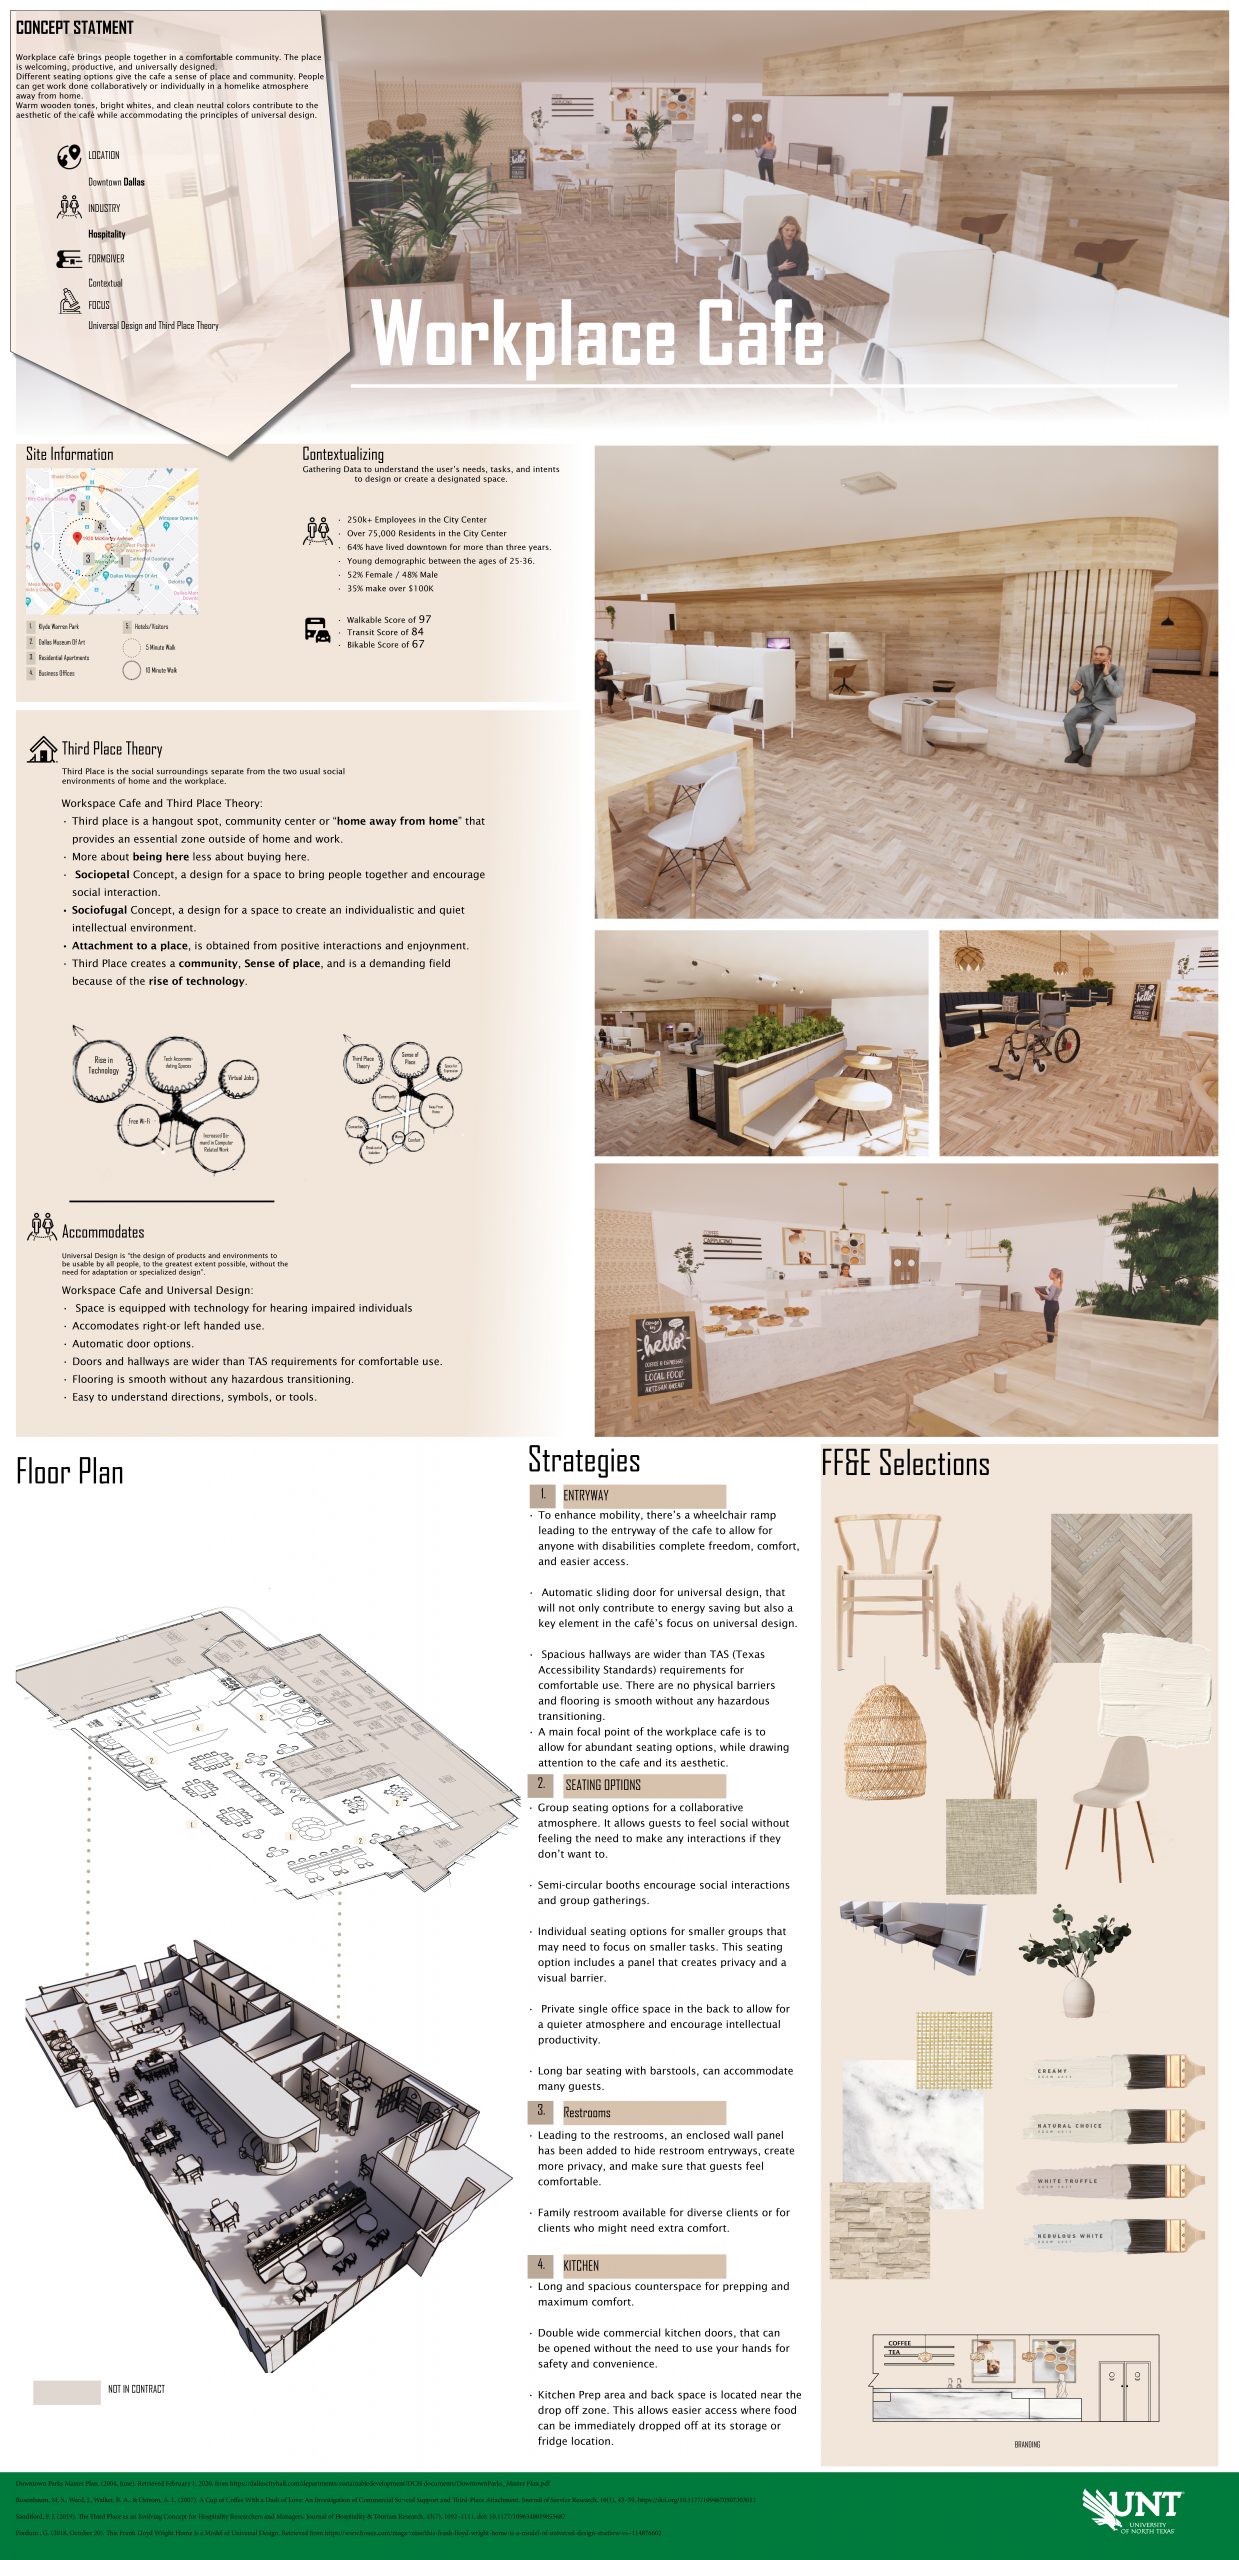 Workplace cafe, concept and floor plan